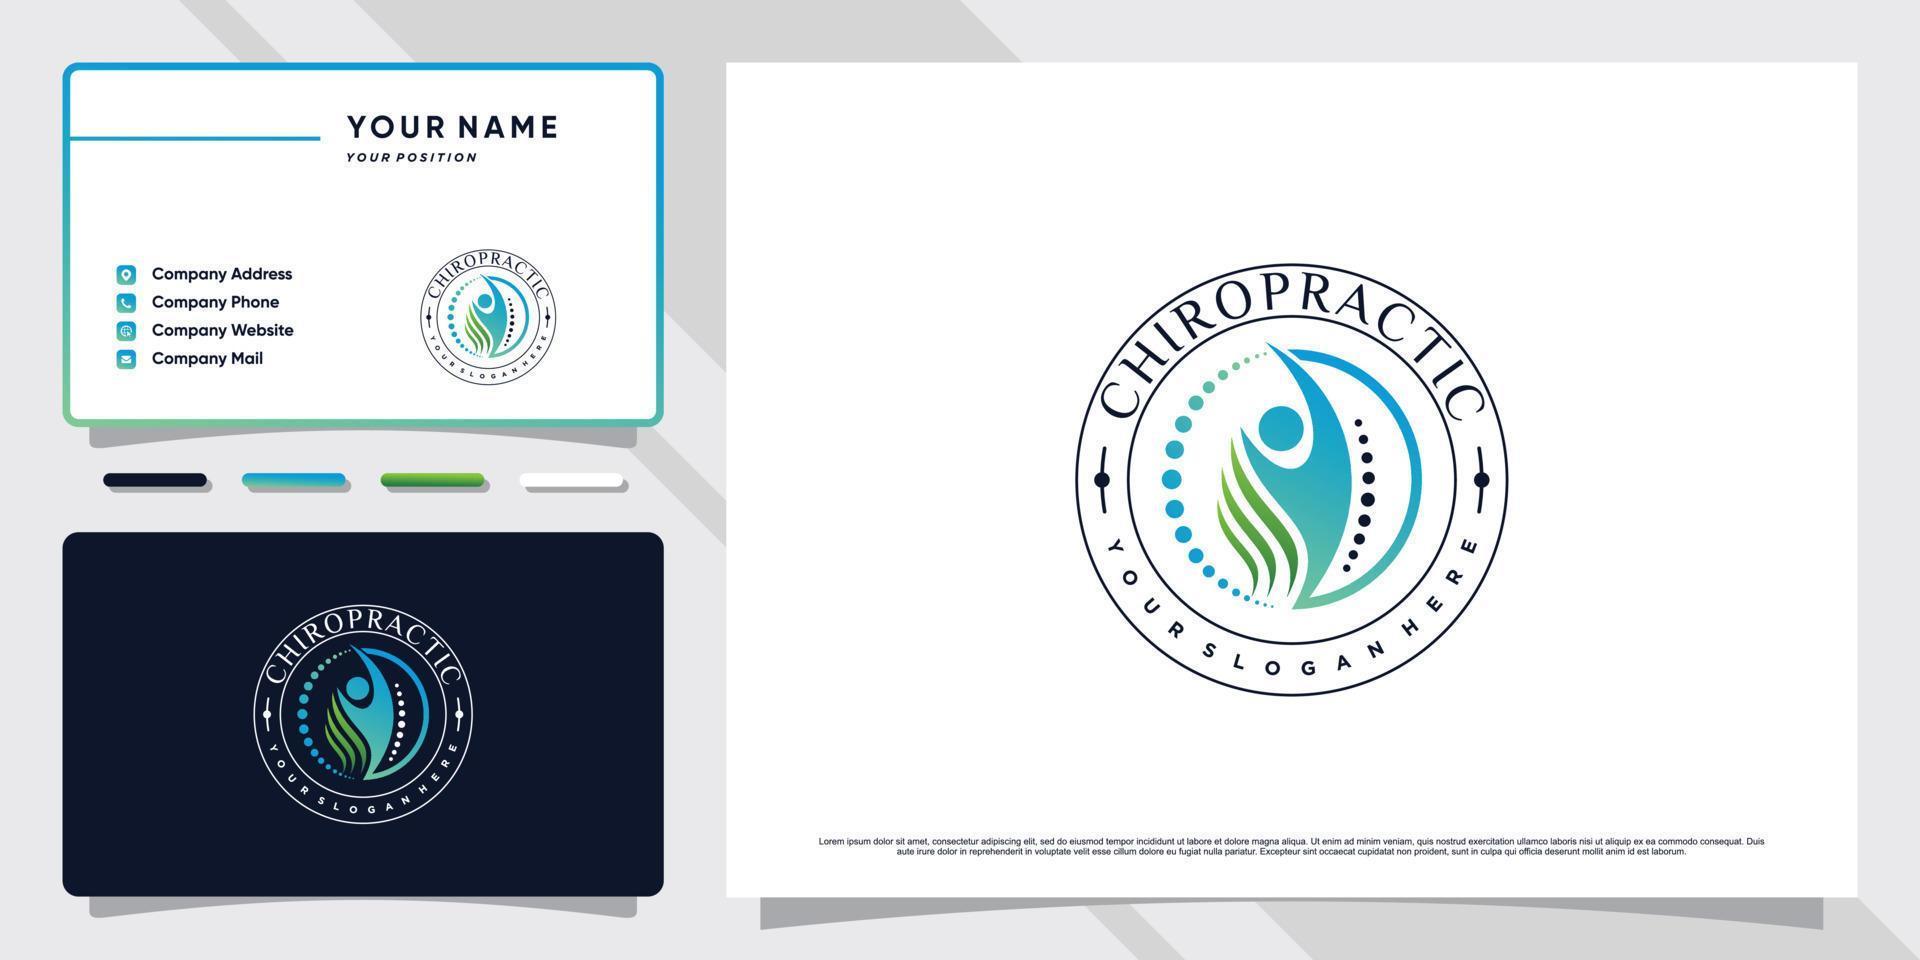 Chiropractic logo with circle concept and business card design Premium Vector